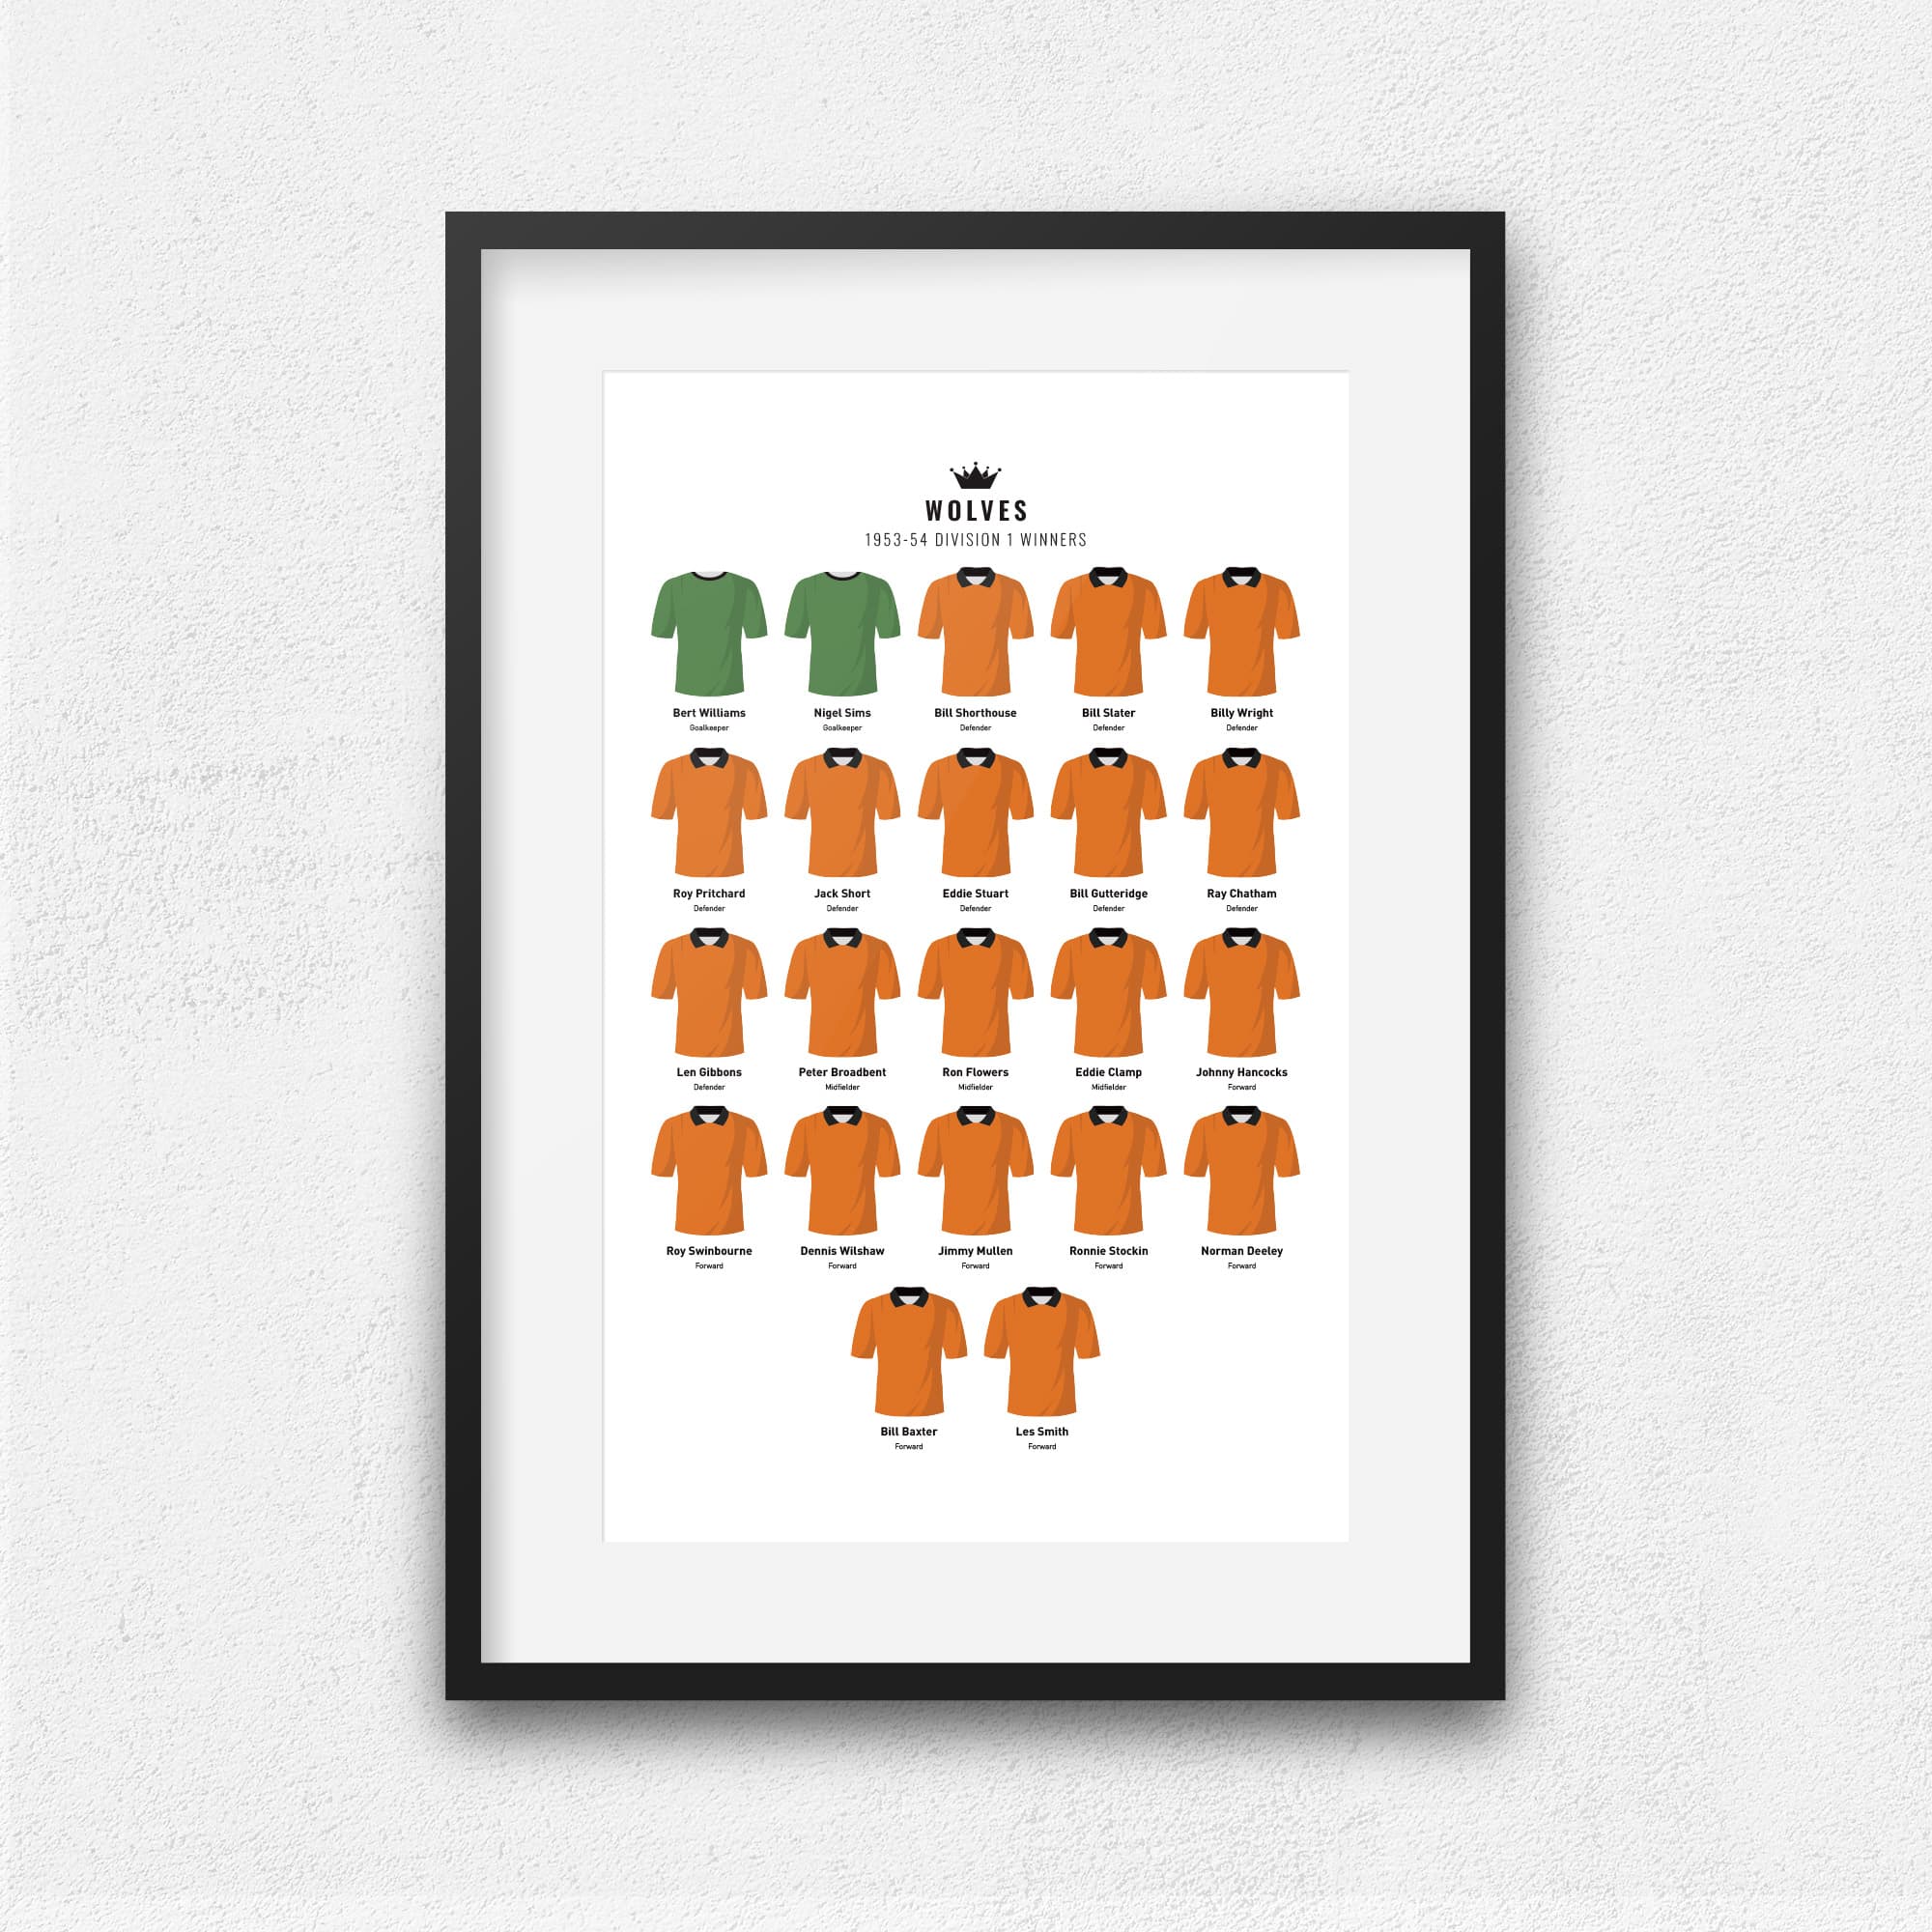 Wolves 1954 Division 1 Winners Football Team Print Good Team On Paper